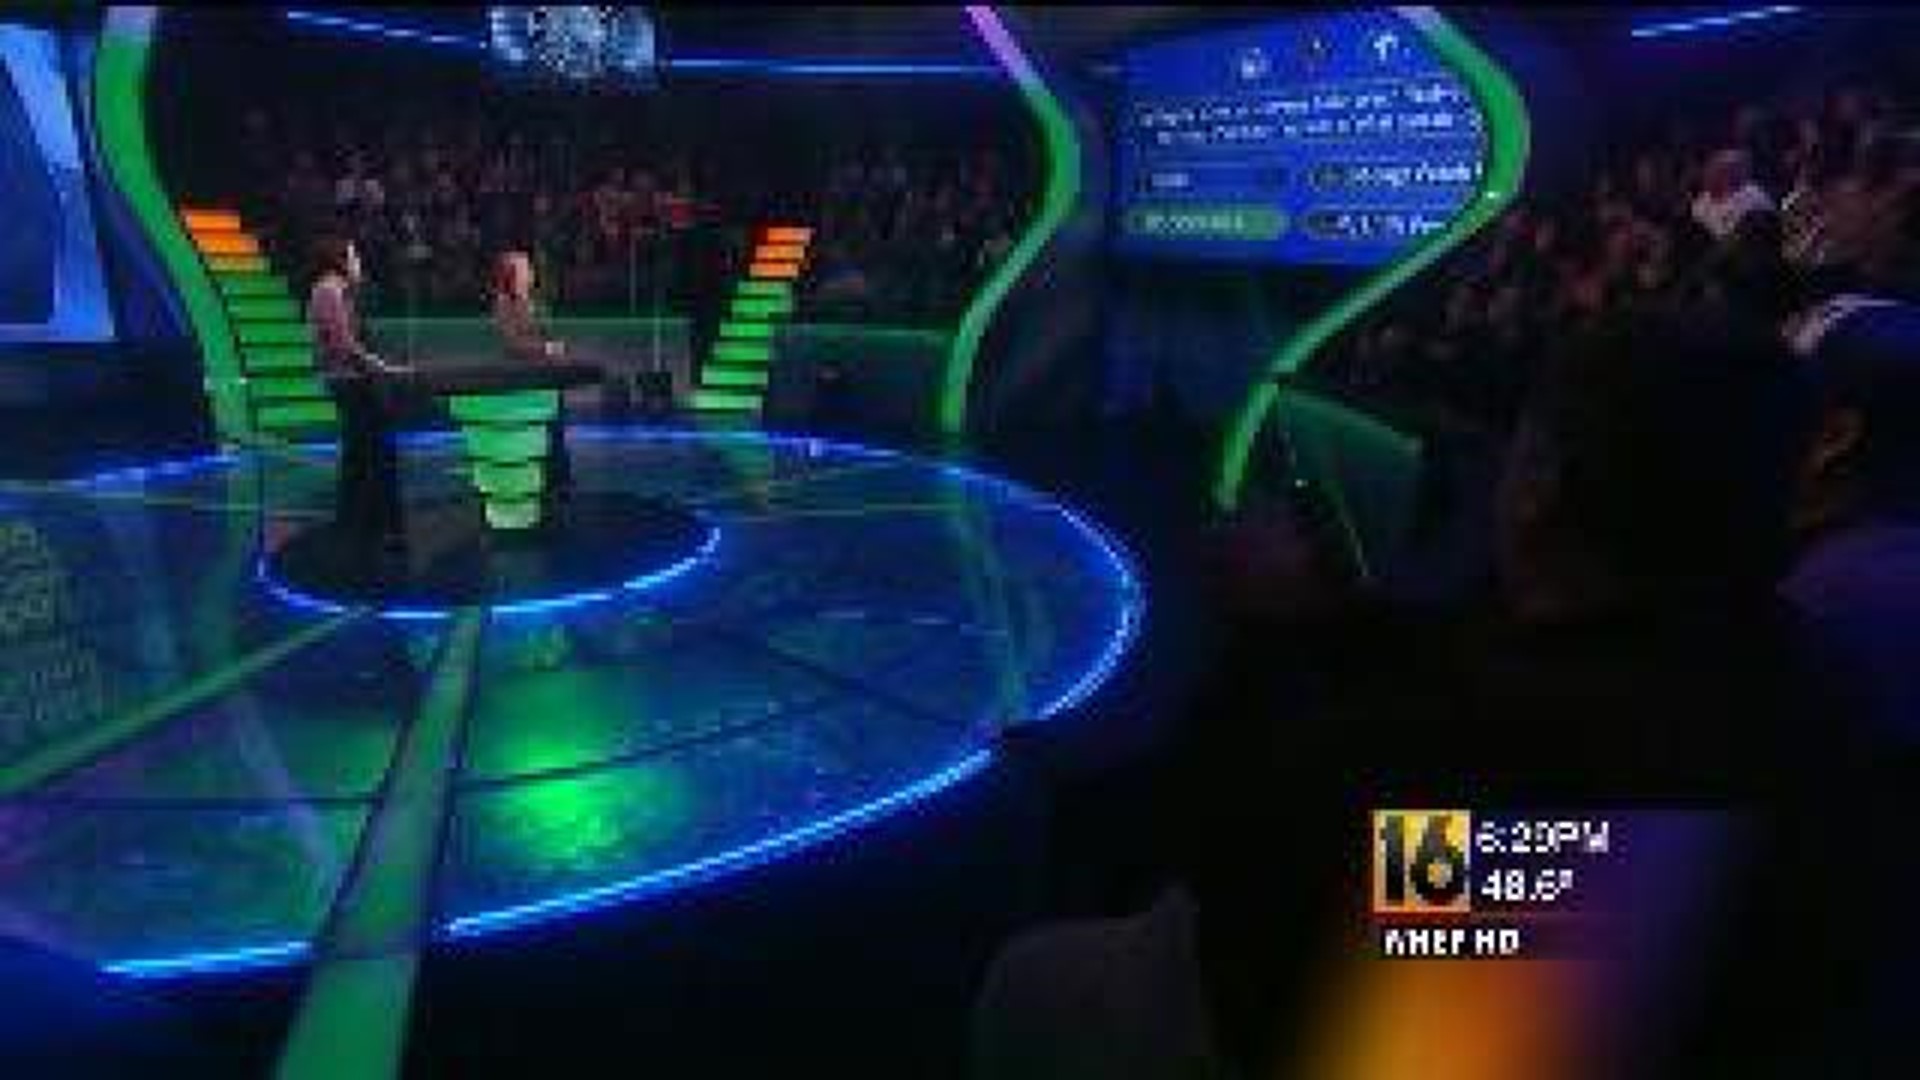 Scranton Teacher Competes on "Who Wants to be a Millionaire"